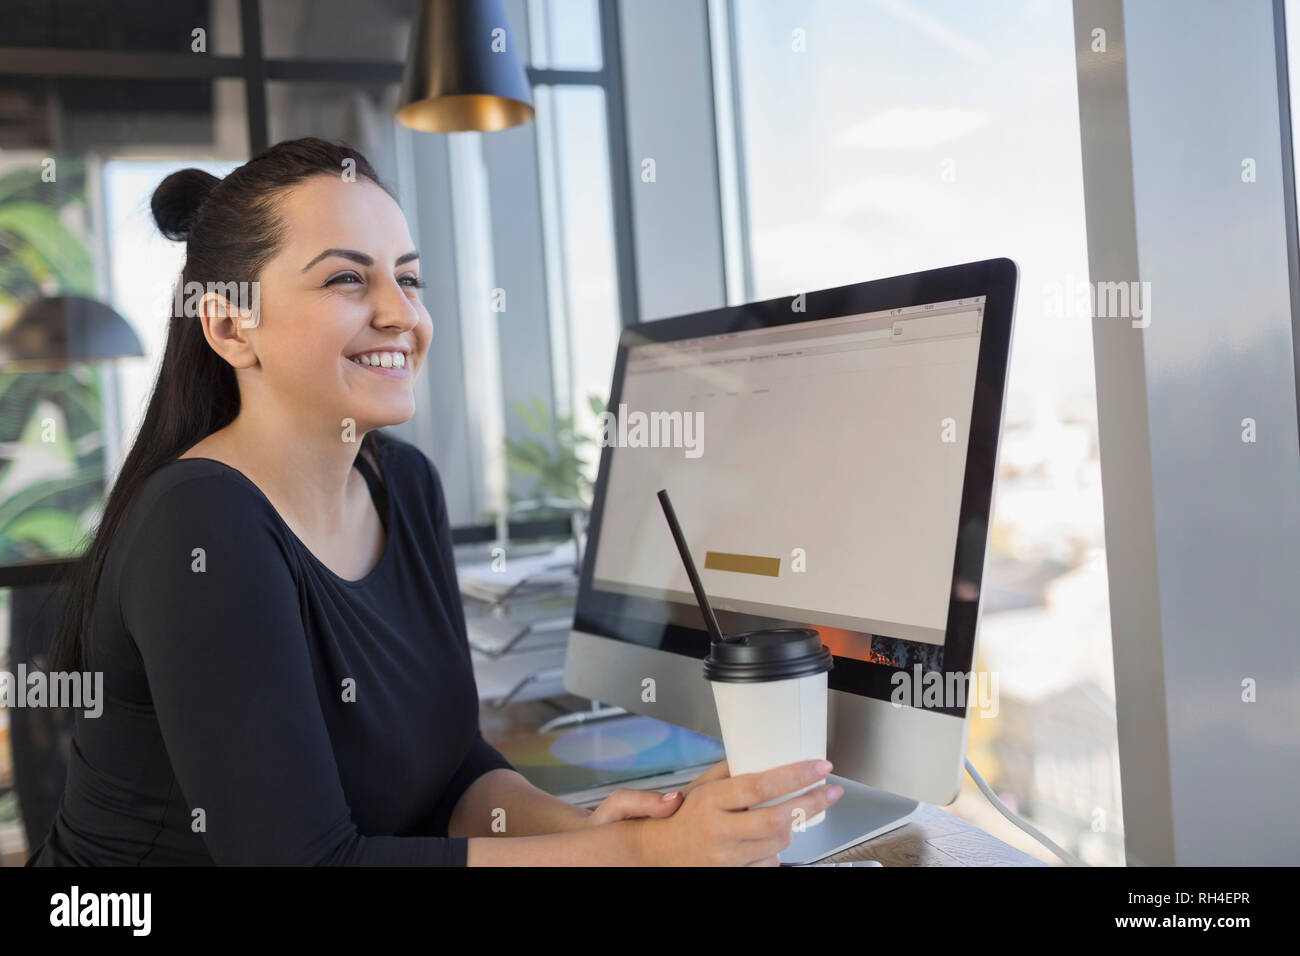 Smiling woman drinking coffee and using computer at internet cafe Stock Photo